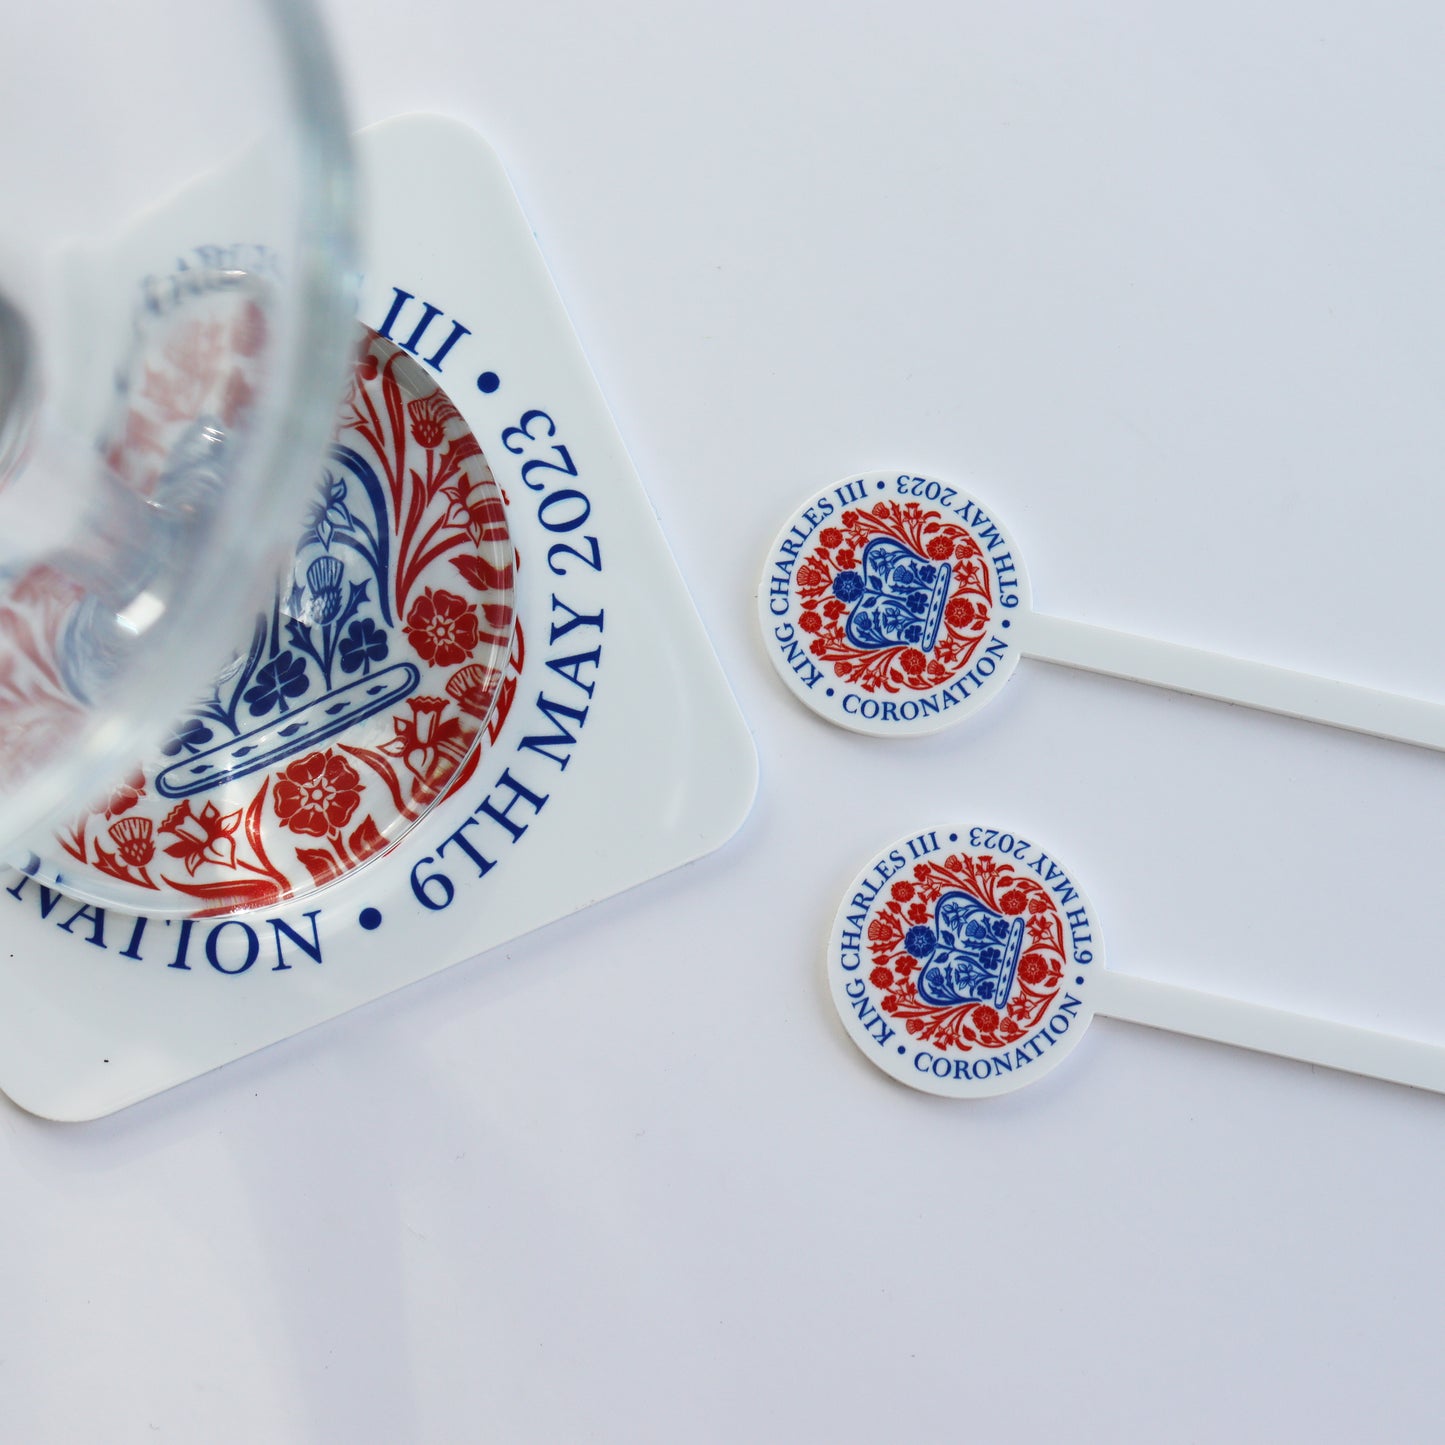 King Charles III drink stirrers cocktail stirrers coronation partyware